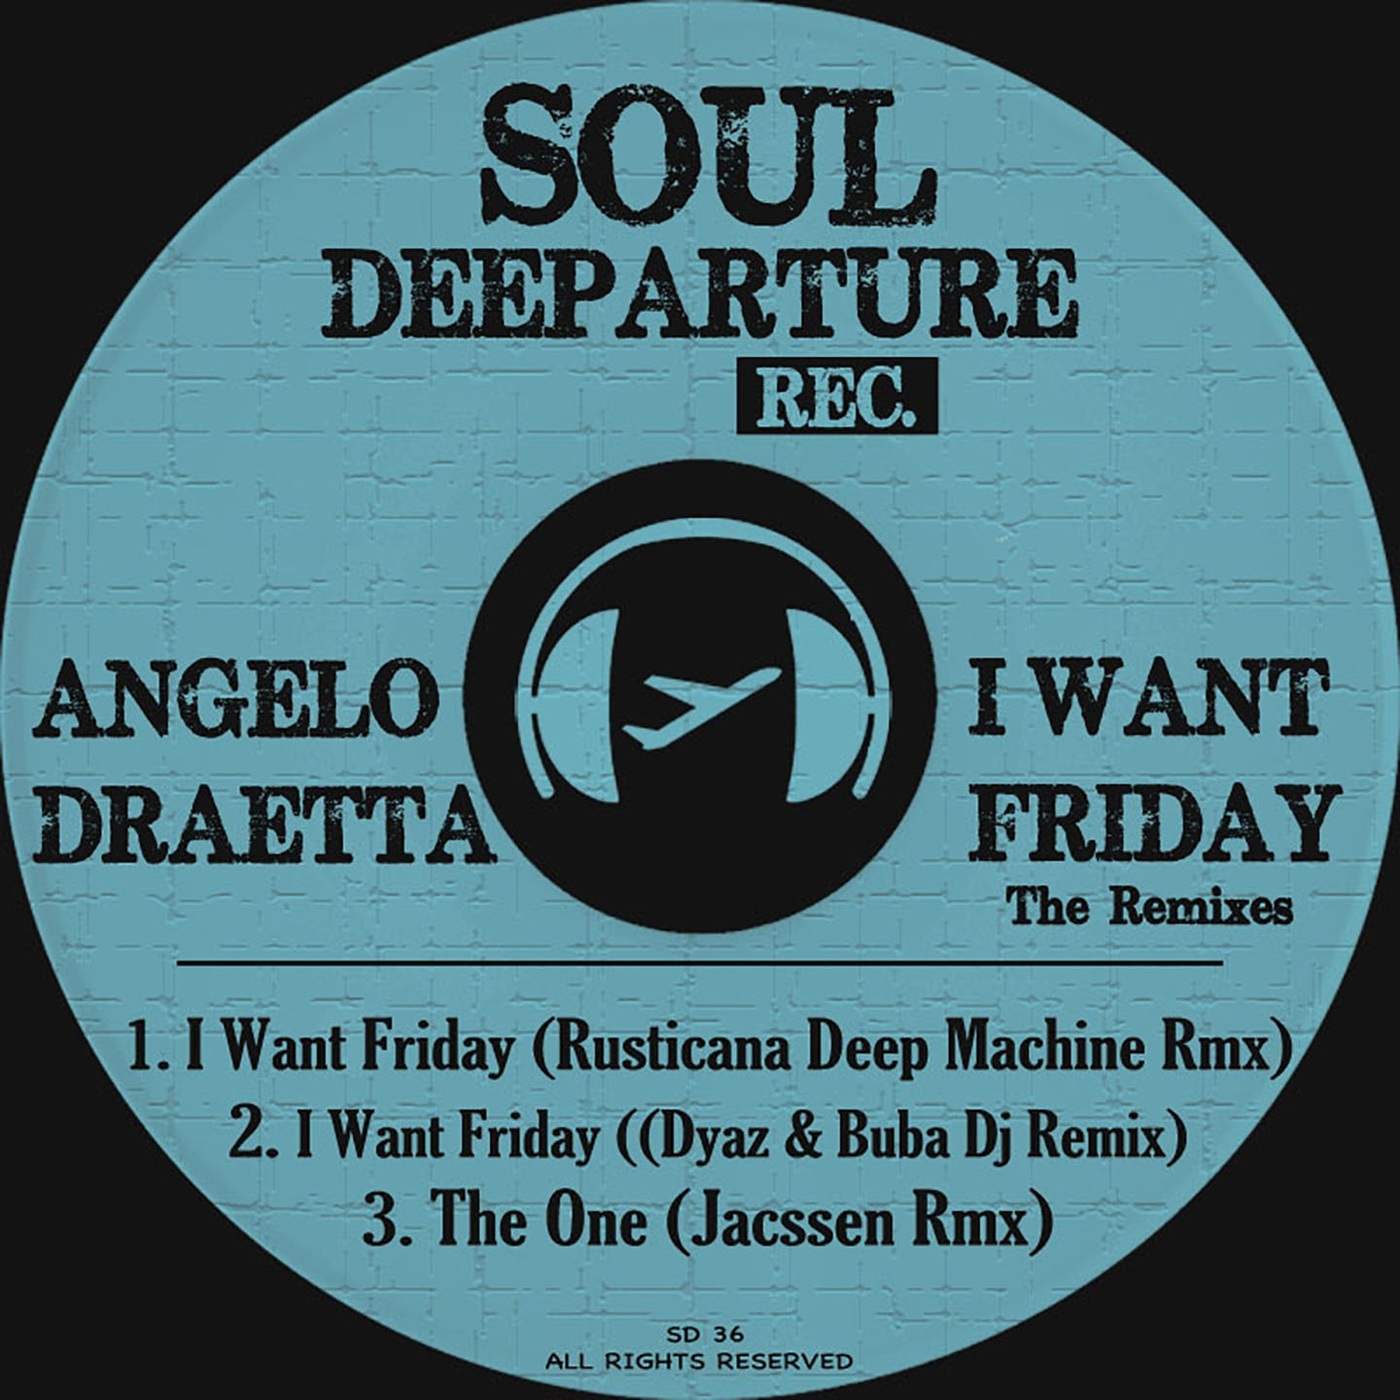 Angelo Draetta - I Want Friday (The Remixes) / Soul Deeparture Records